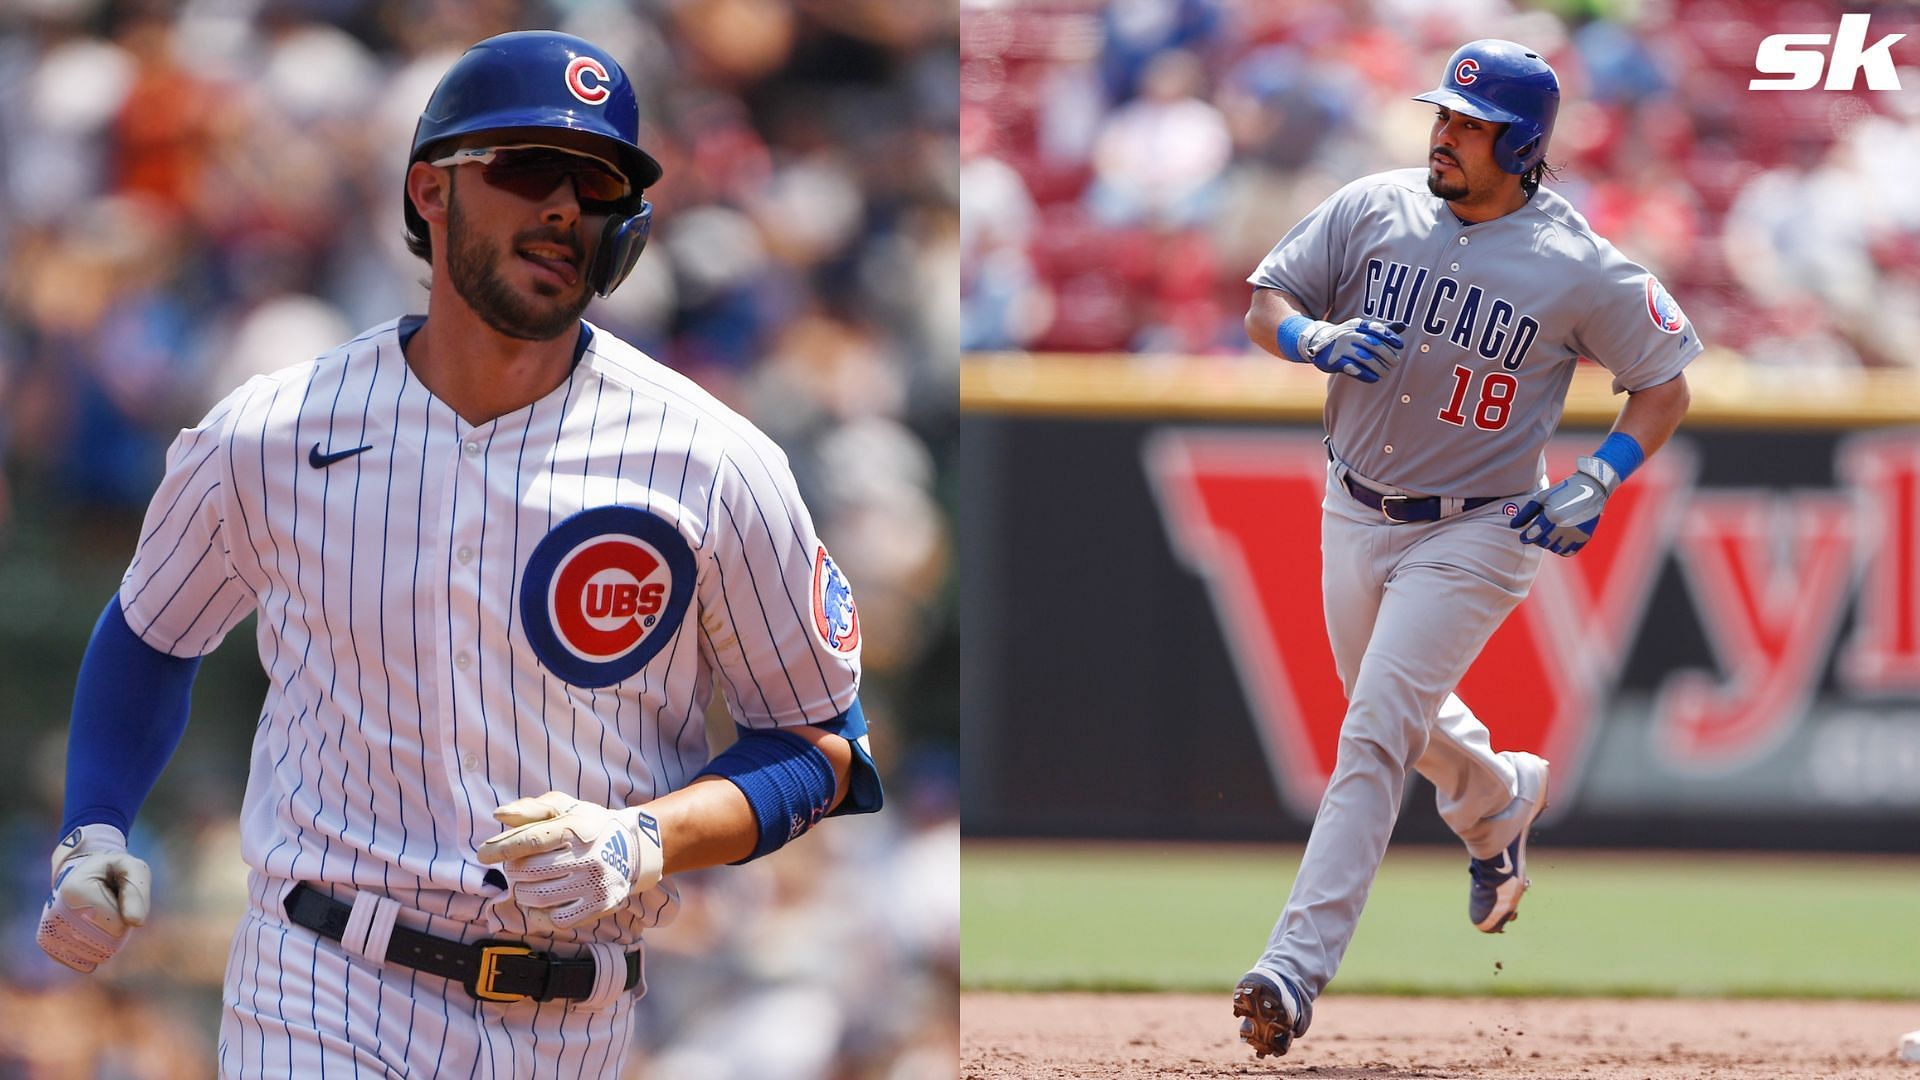 Chicago Cubs players' college baseball careers